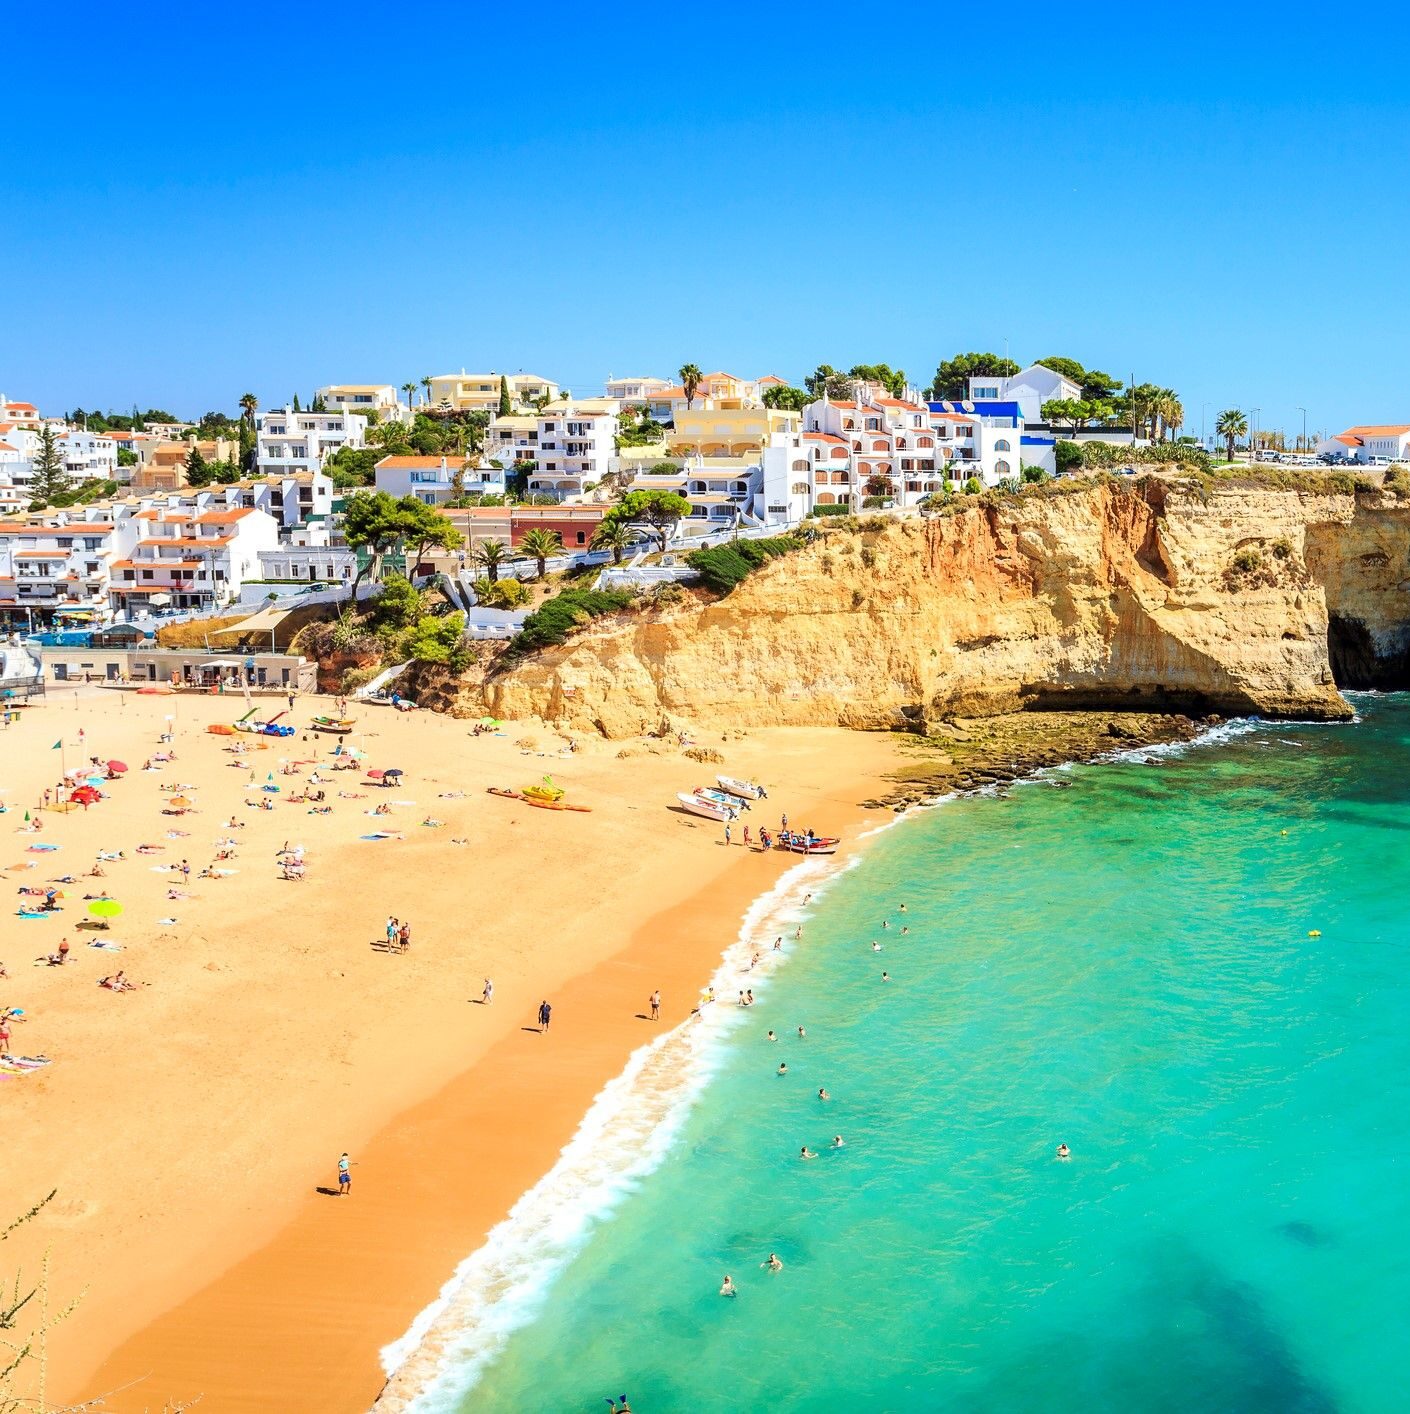 Did You Miss our Algarve Trip?